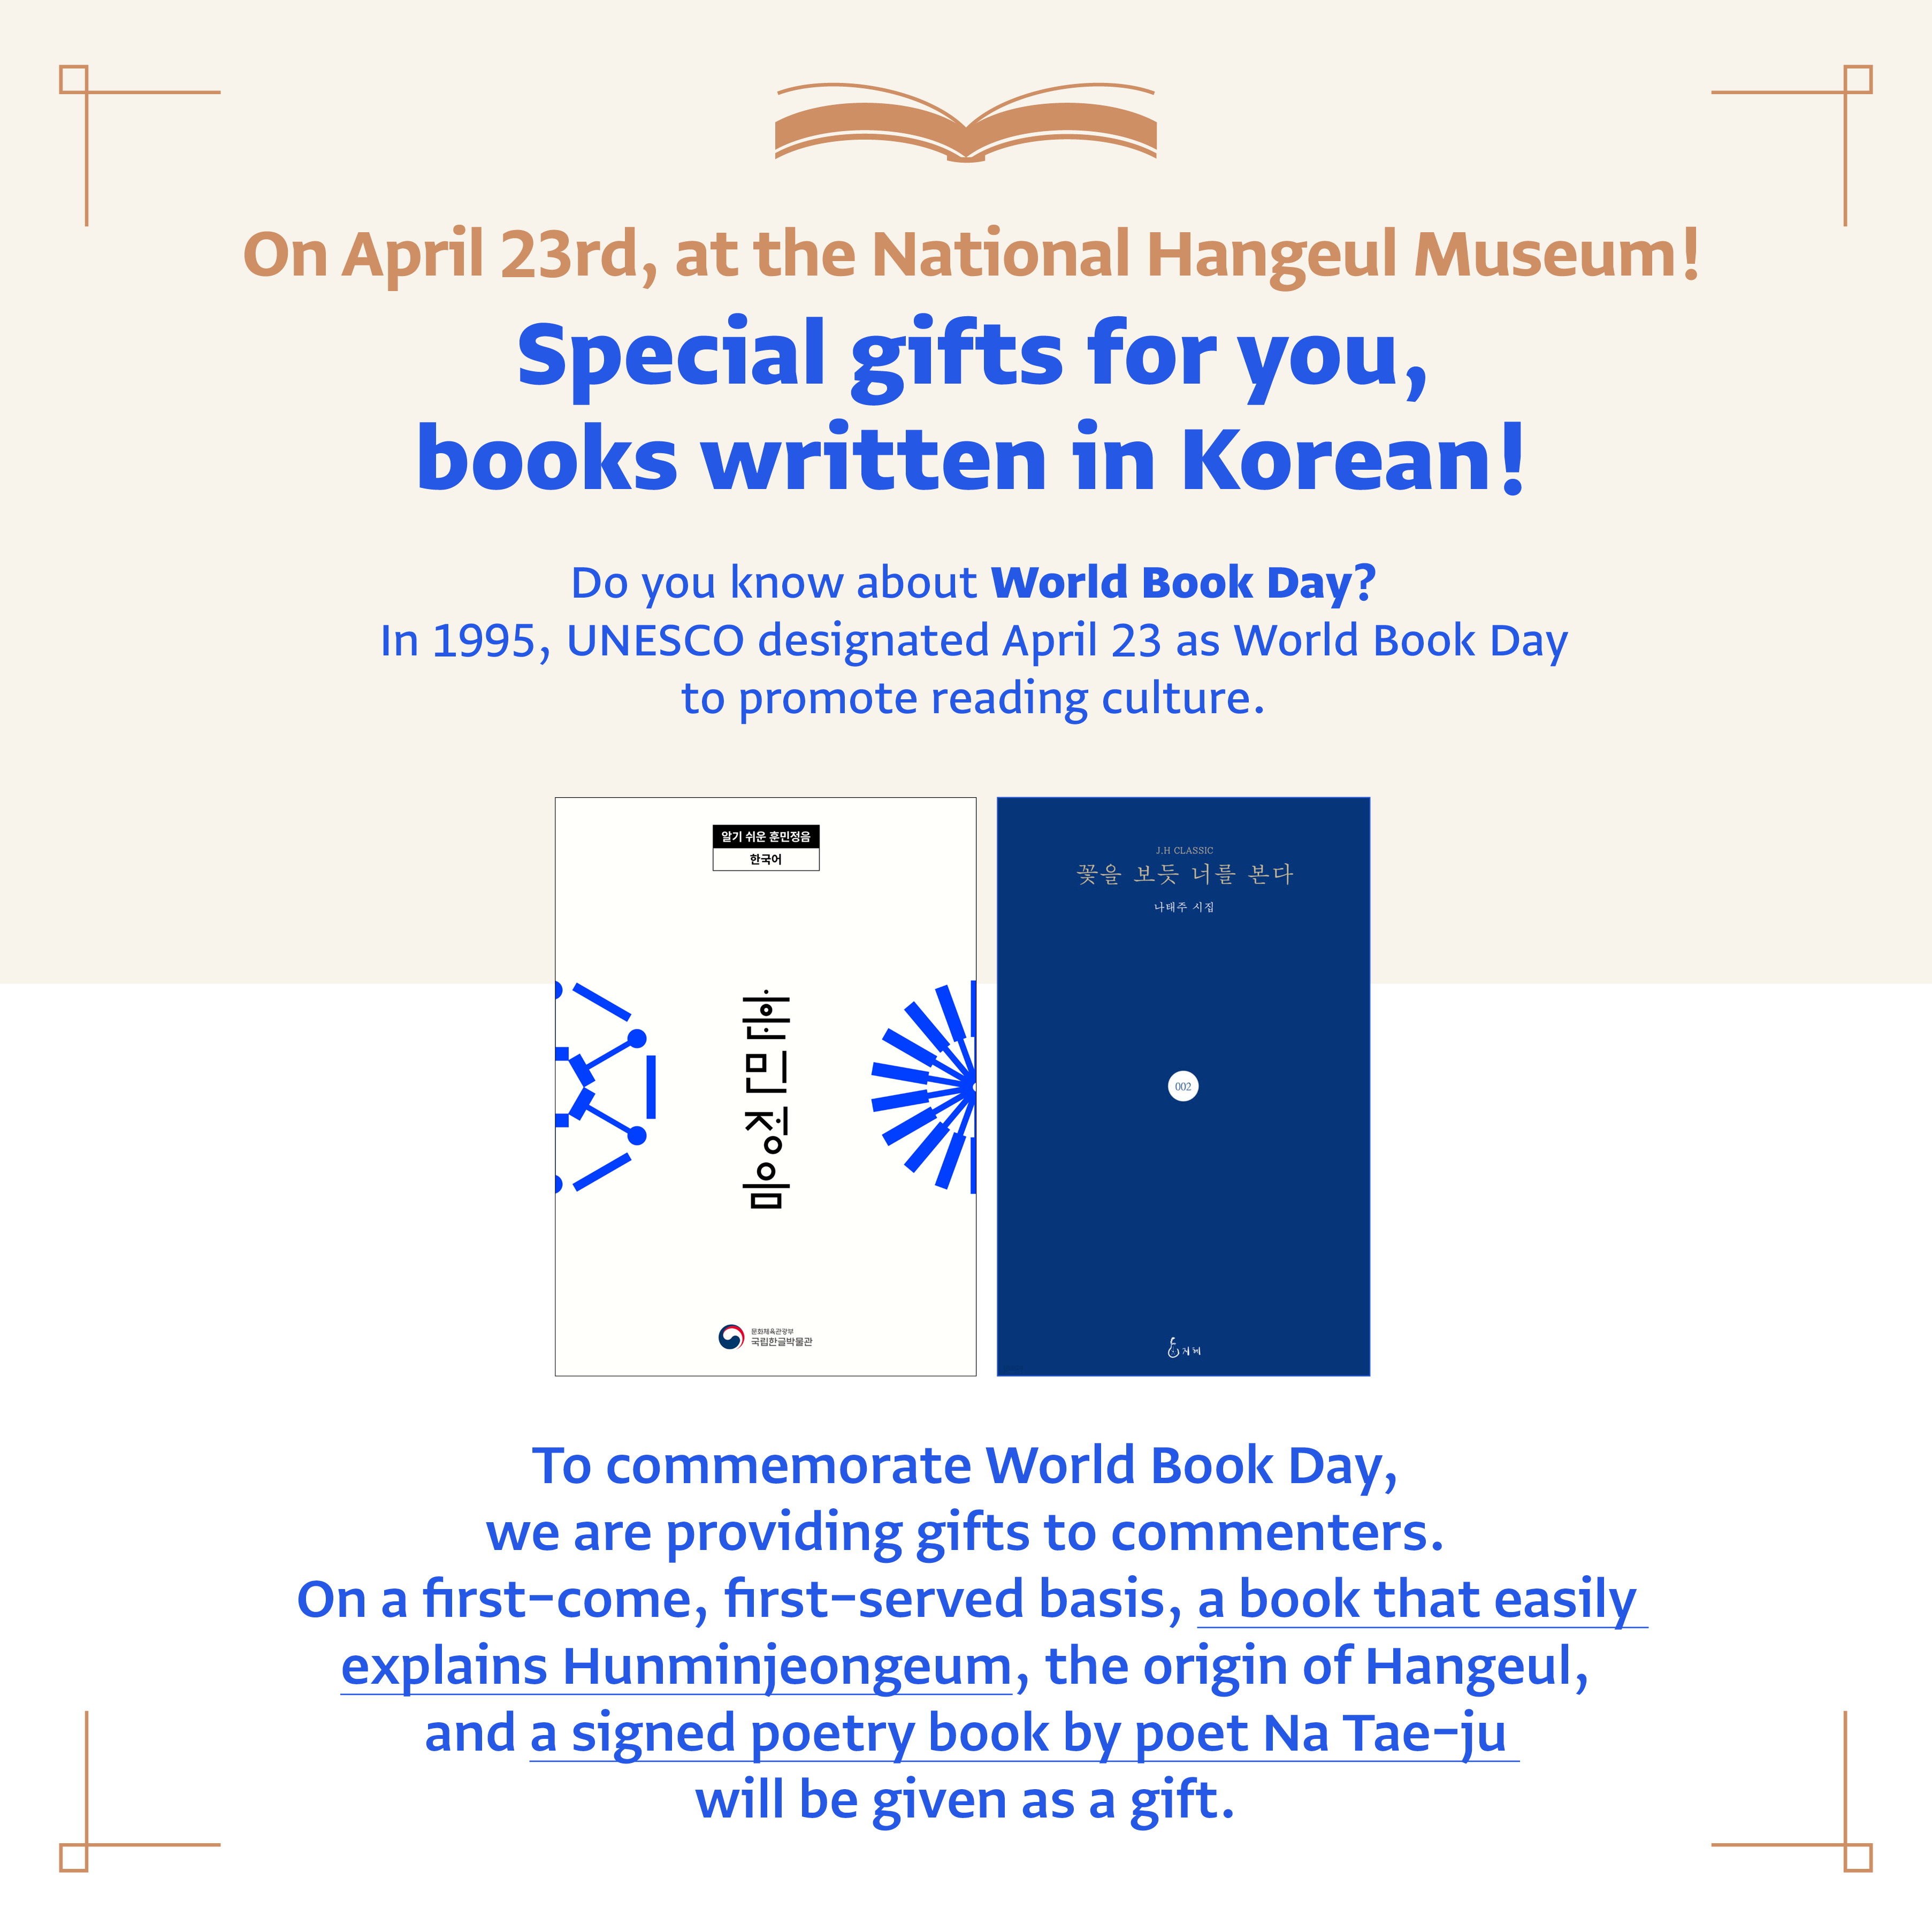 On April 23rd, at the National Hangeul Museum! Special gifts for you, books written in Korean! Do you know about World Book Day? In 1995, UNESCO designated April 23 as World Book Day to promote reading culture. Tocommenmorate World Book Day, we are providing gifts to commenters. On a first-come, first-served basis, a book that easily explains Hunminjeongeum, the origin of Hangeul, and a signed poetry book by poet Na Tae-ju will be given aw a gift.